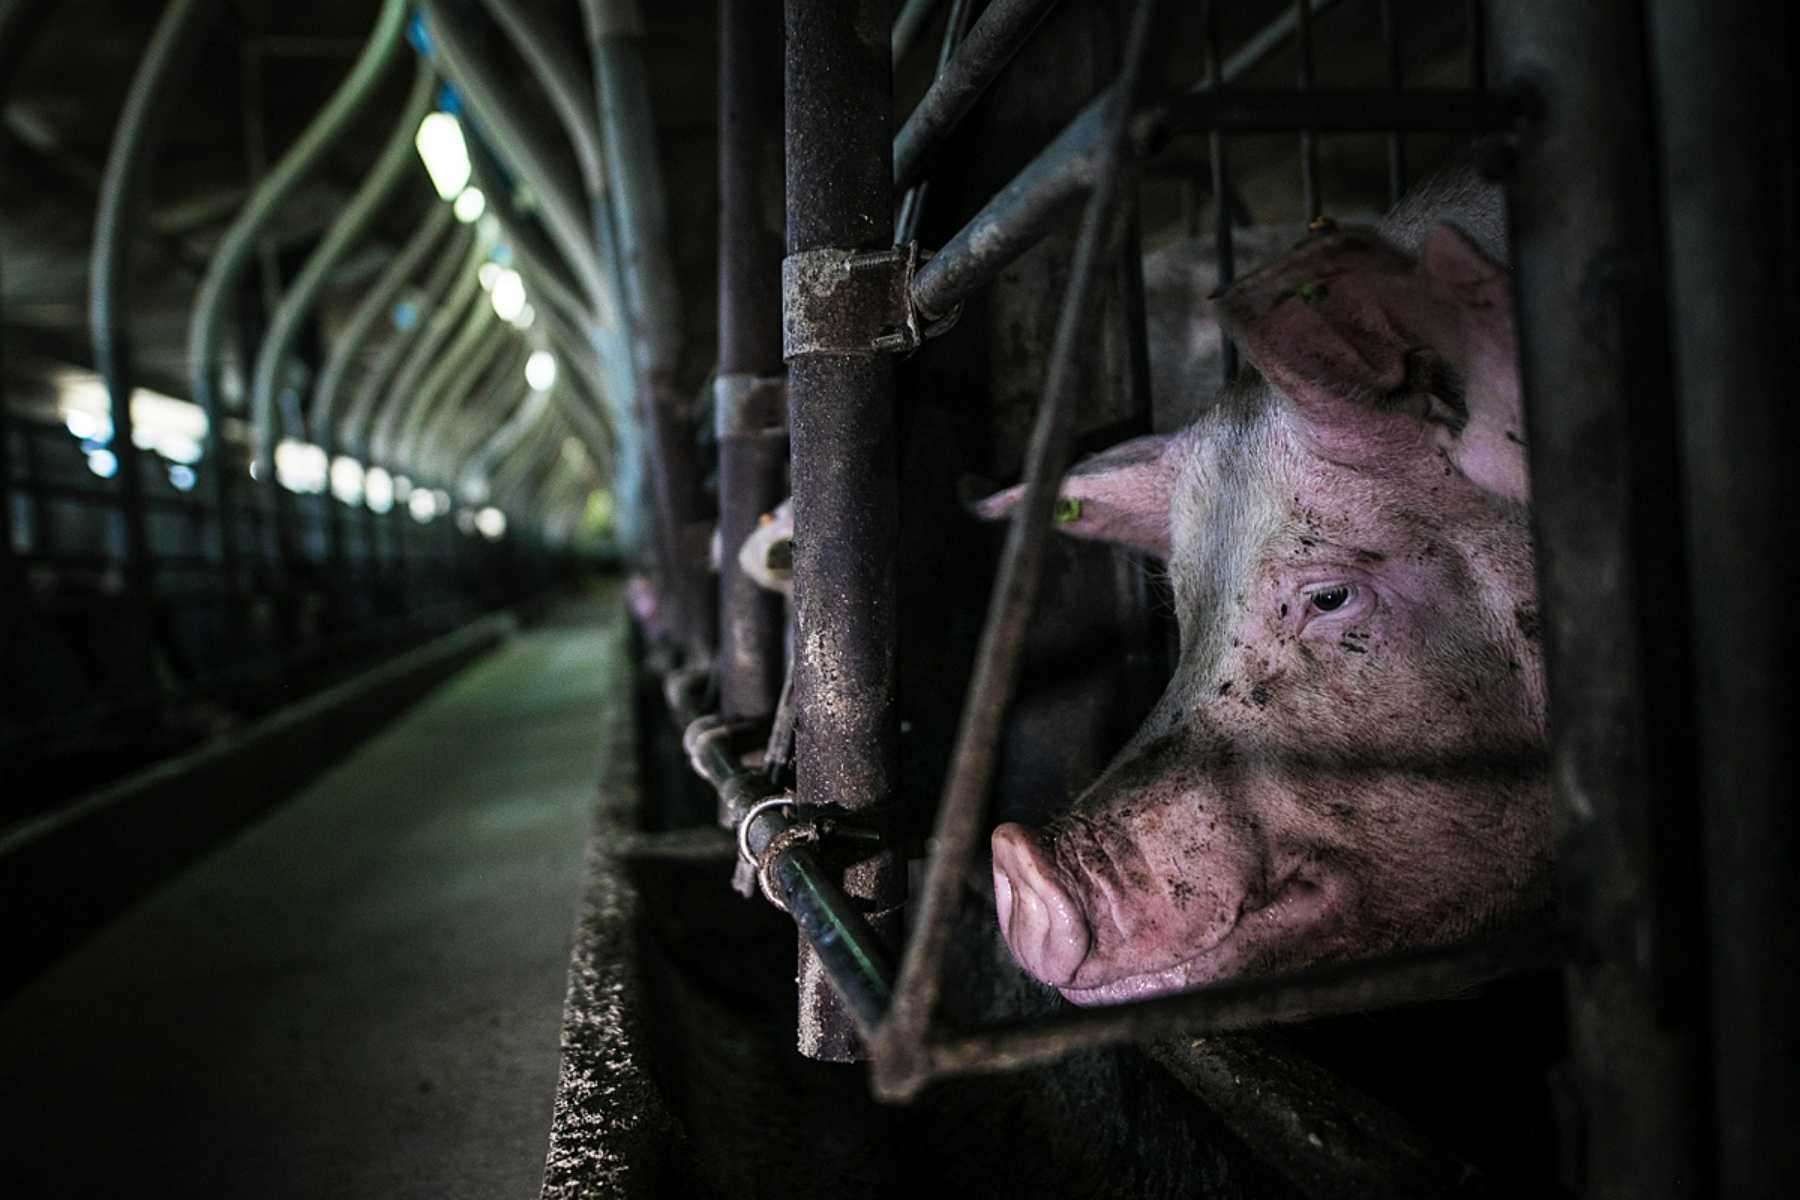 A sow in a gestation crate awaits insemination. Confined in these cages, the sows can only stand up or lie down, they are not able to turn around.